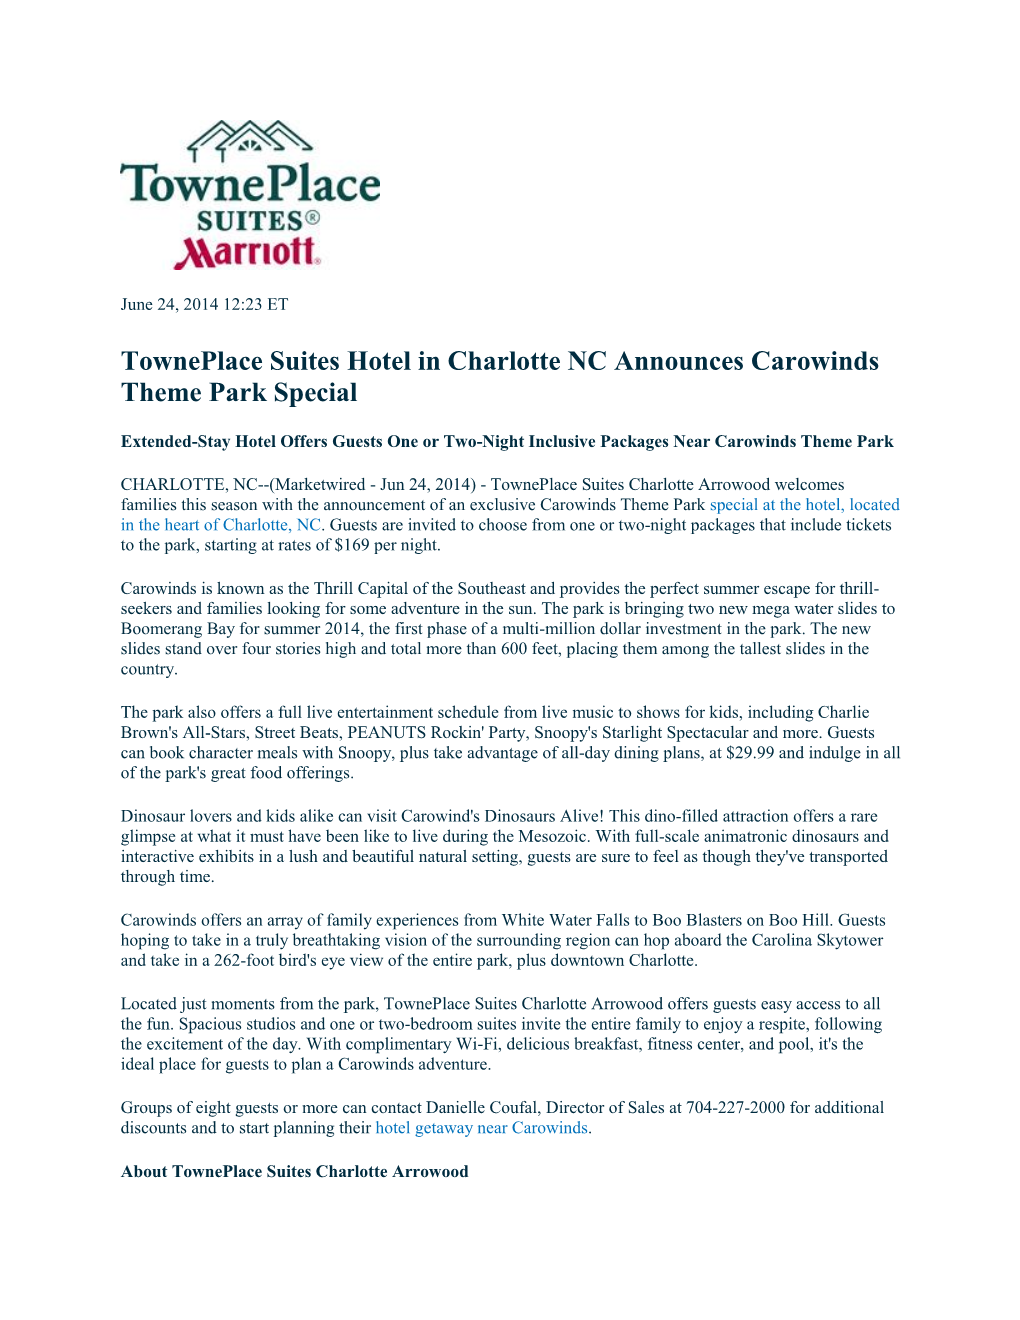 Towneplace Suites Hotel in Charlotte NC Announces Carowinds Theme Park Special